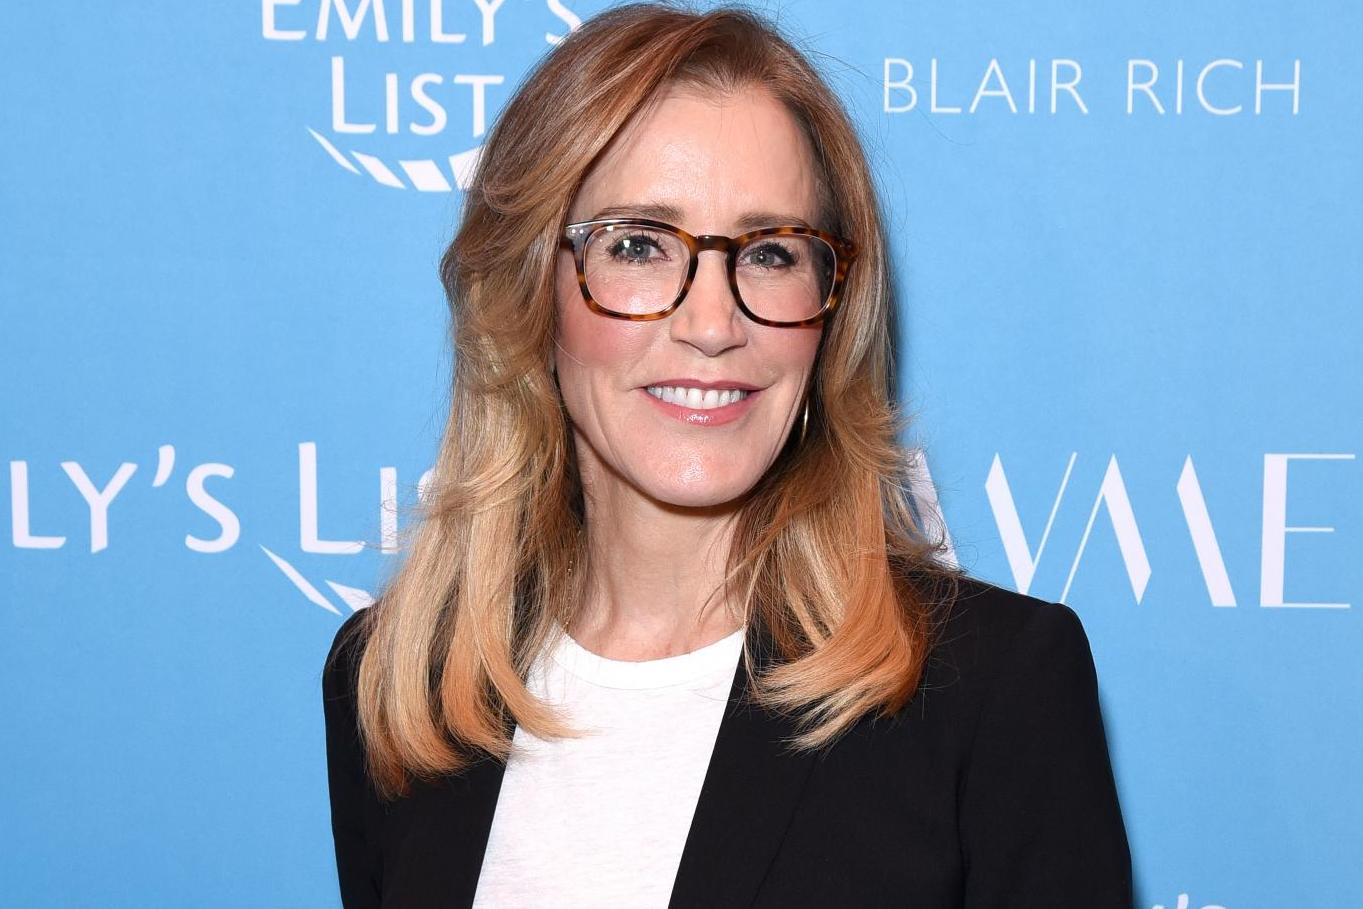 Felicity Huffman attends Raising Our Voices: Supporting More Women in Hollywood & Politics at Four Seasons Hotel Los Angeles in Beverly Hills on 19 February, 2019 in Los Angeles, California.